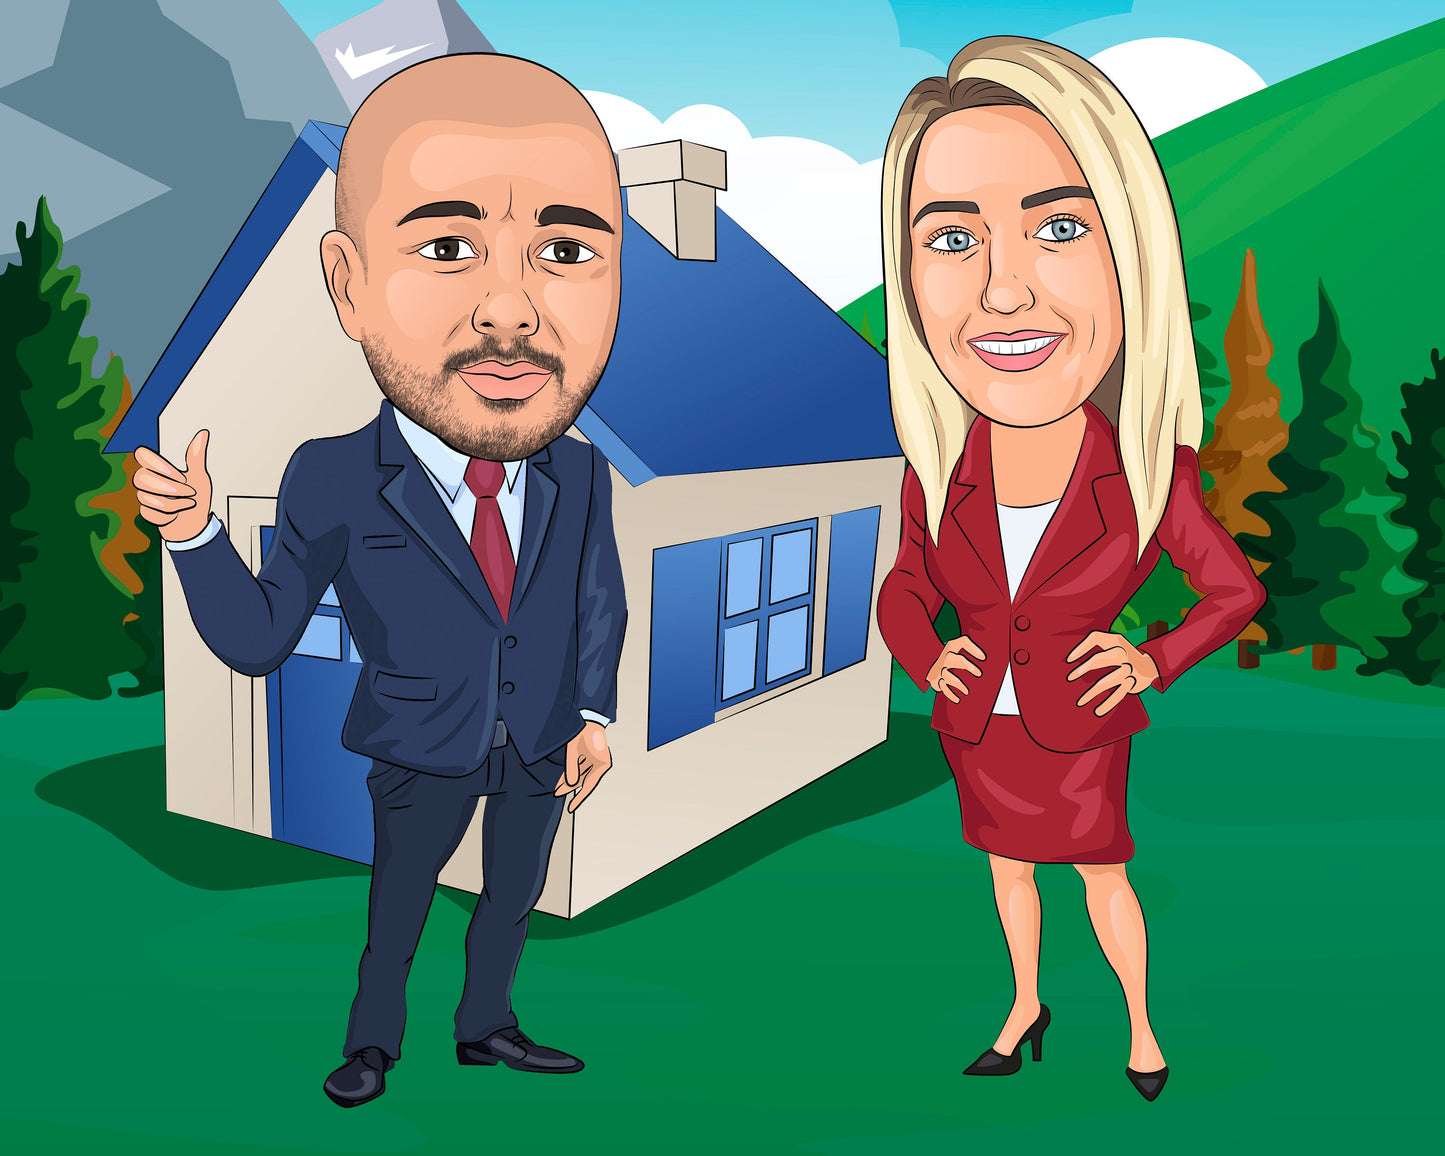 Real Estate Agent Gift - Custom Caricature Portrait From Your Photo/Real Estate Broker Gift